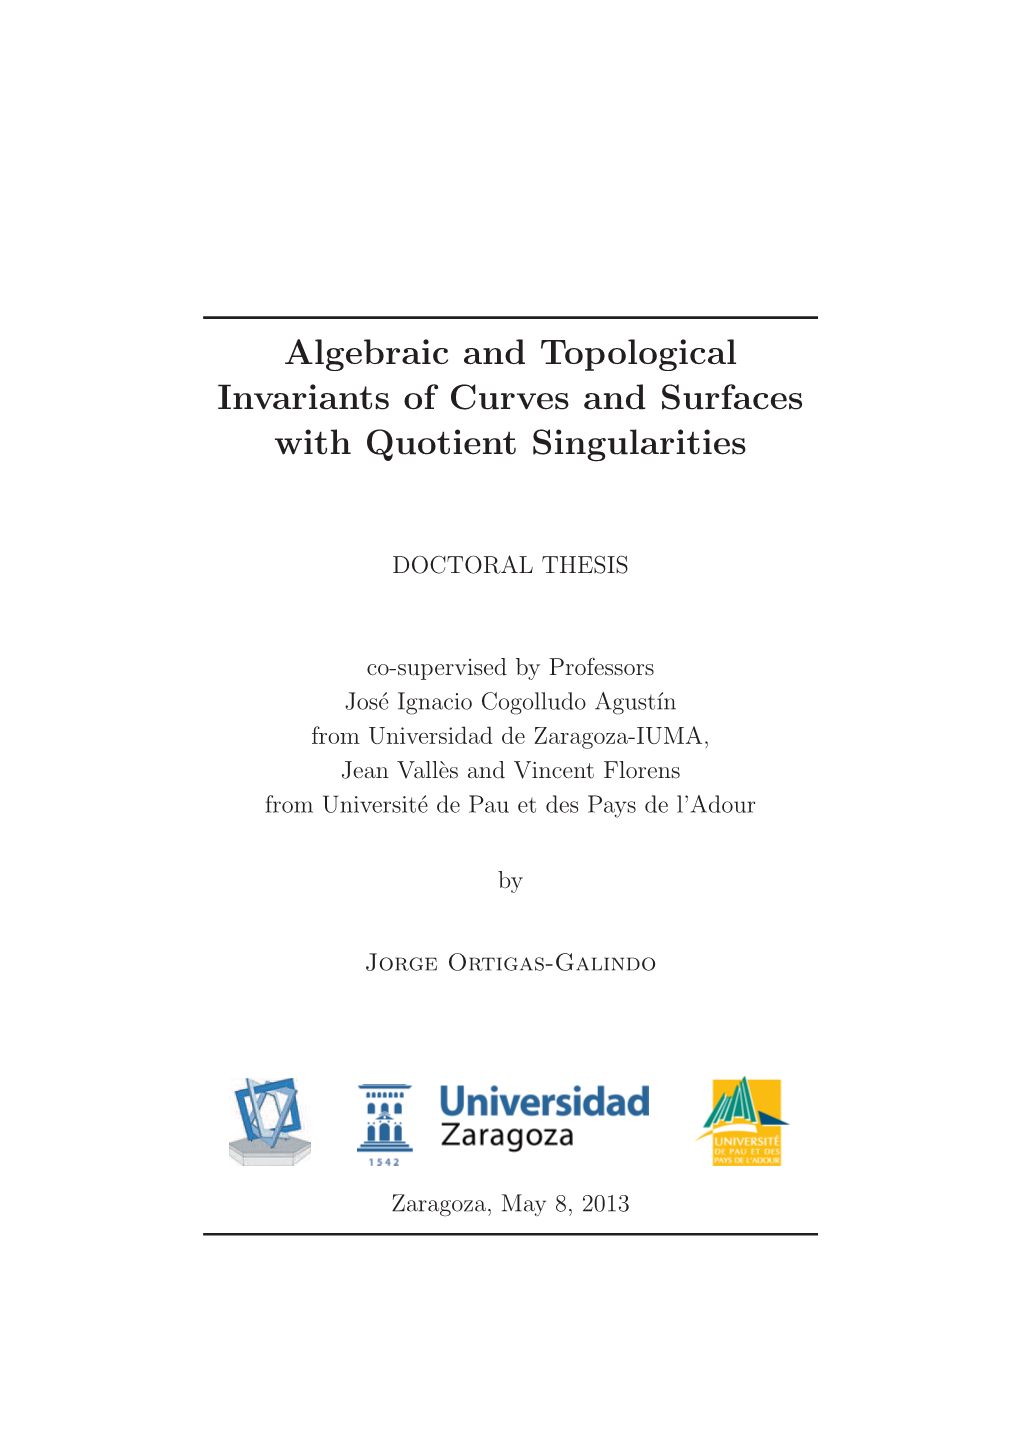 Algebraic and Topological Invariants of Curves and Surfaces with Quotient Singularities